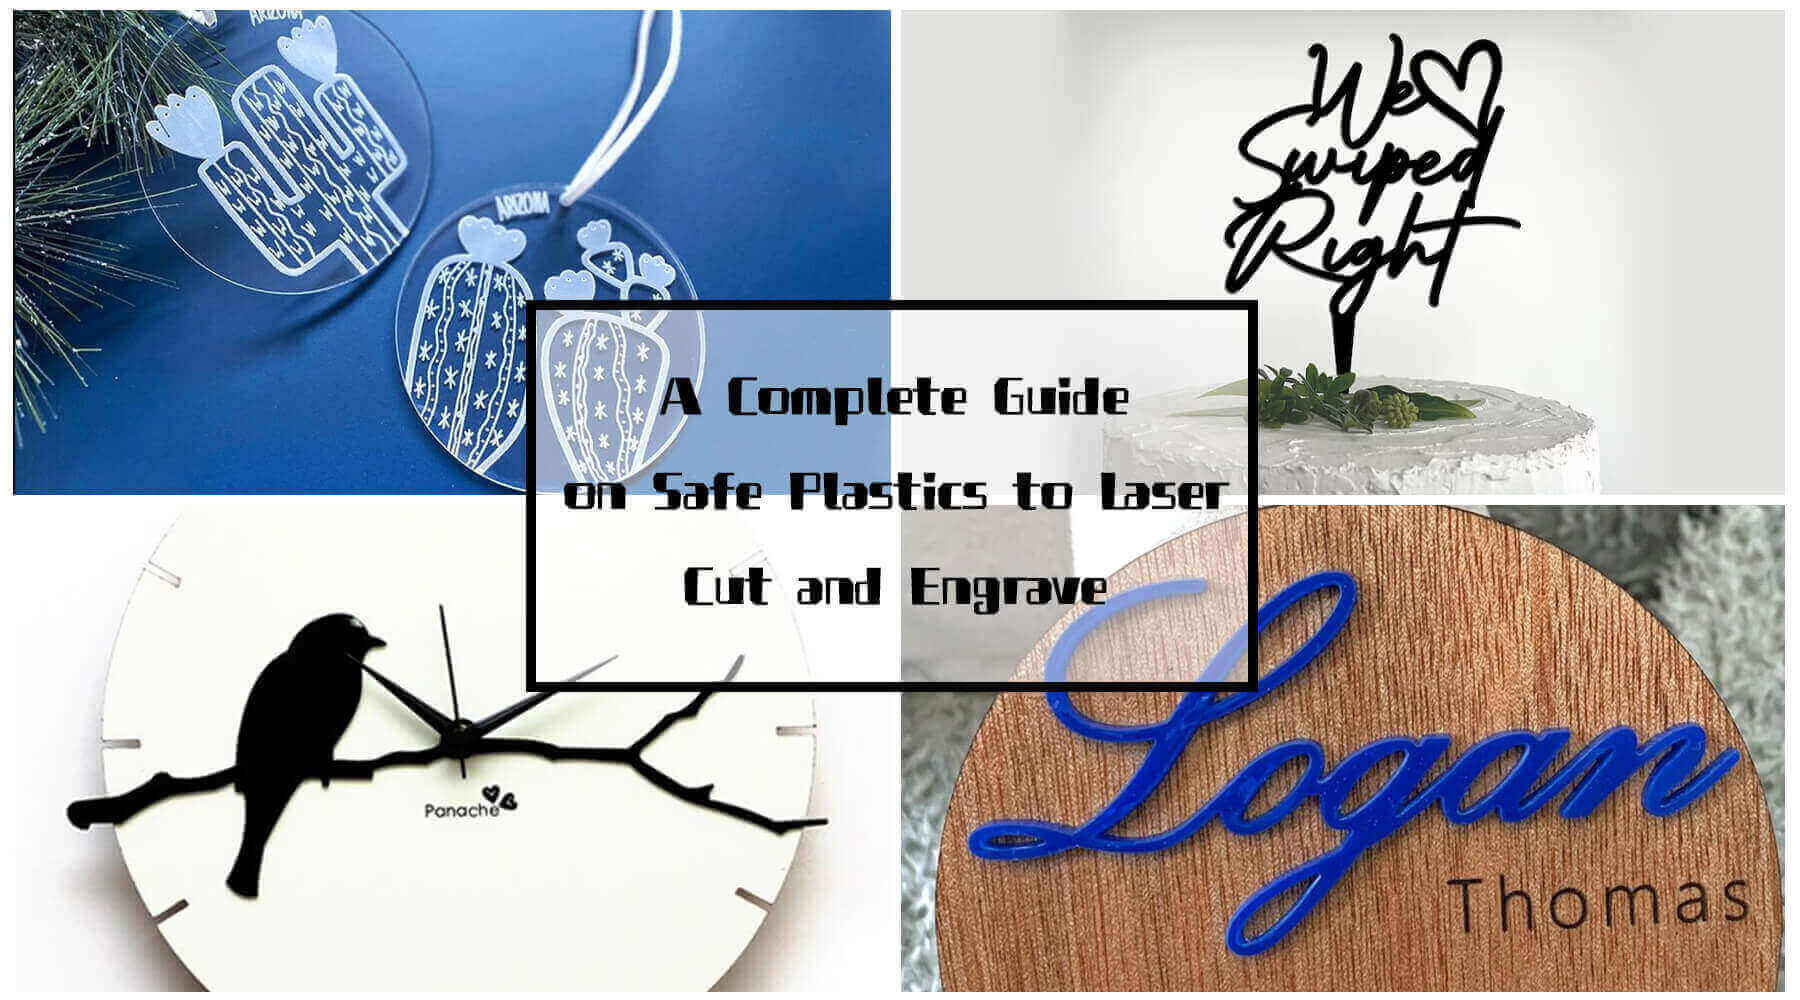 A Complete Guide on Safe Plastics to Laser Cut and Engrave